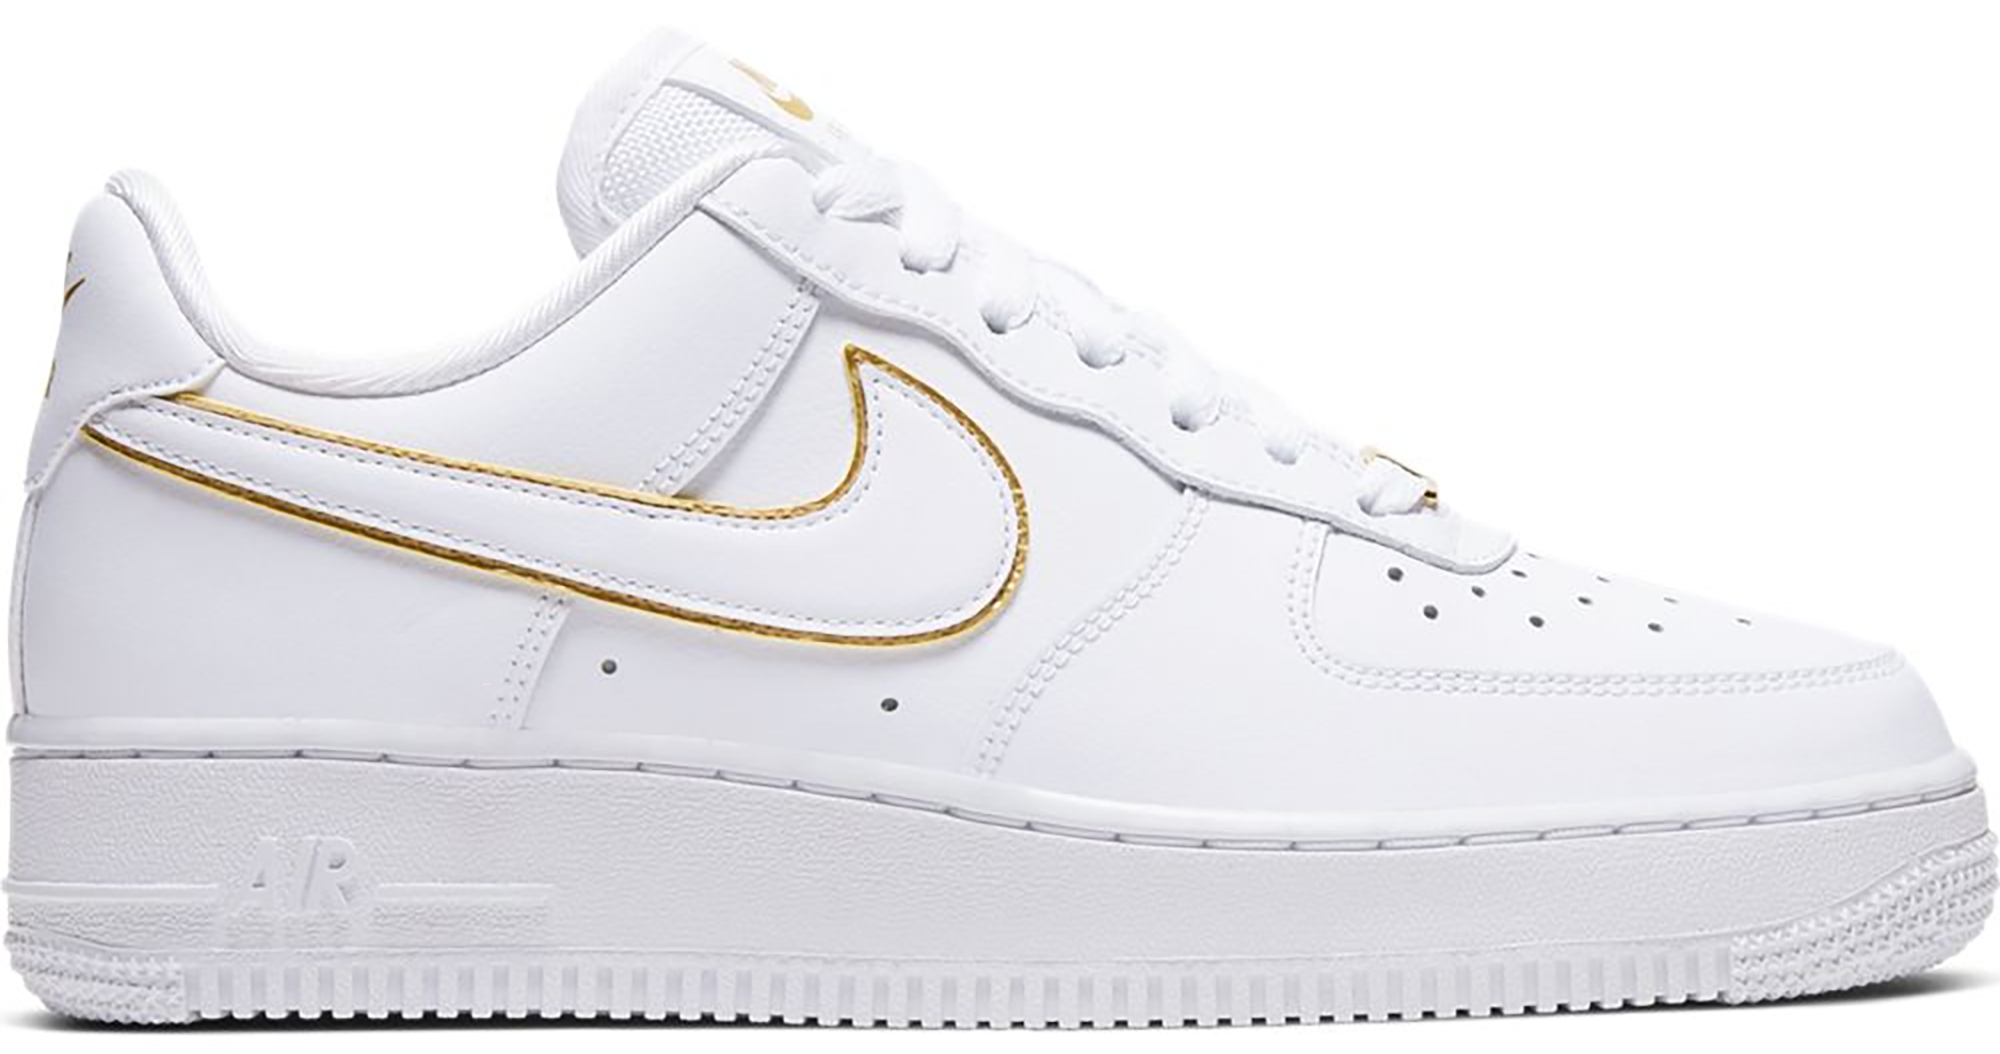 air force white with gold